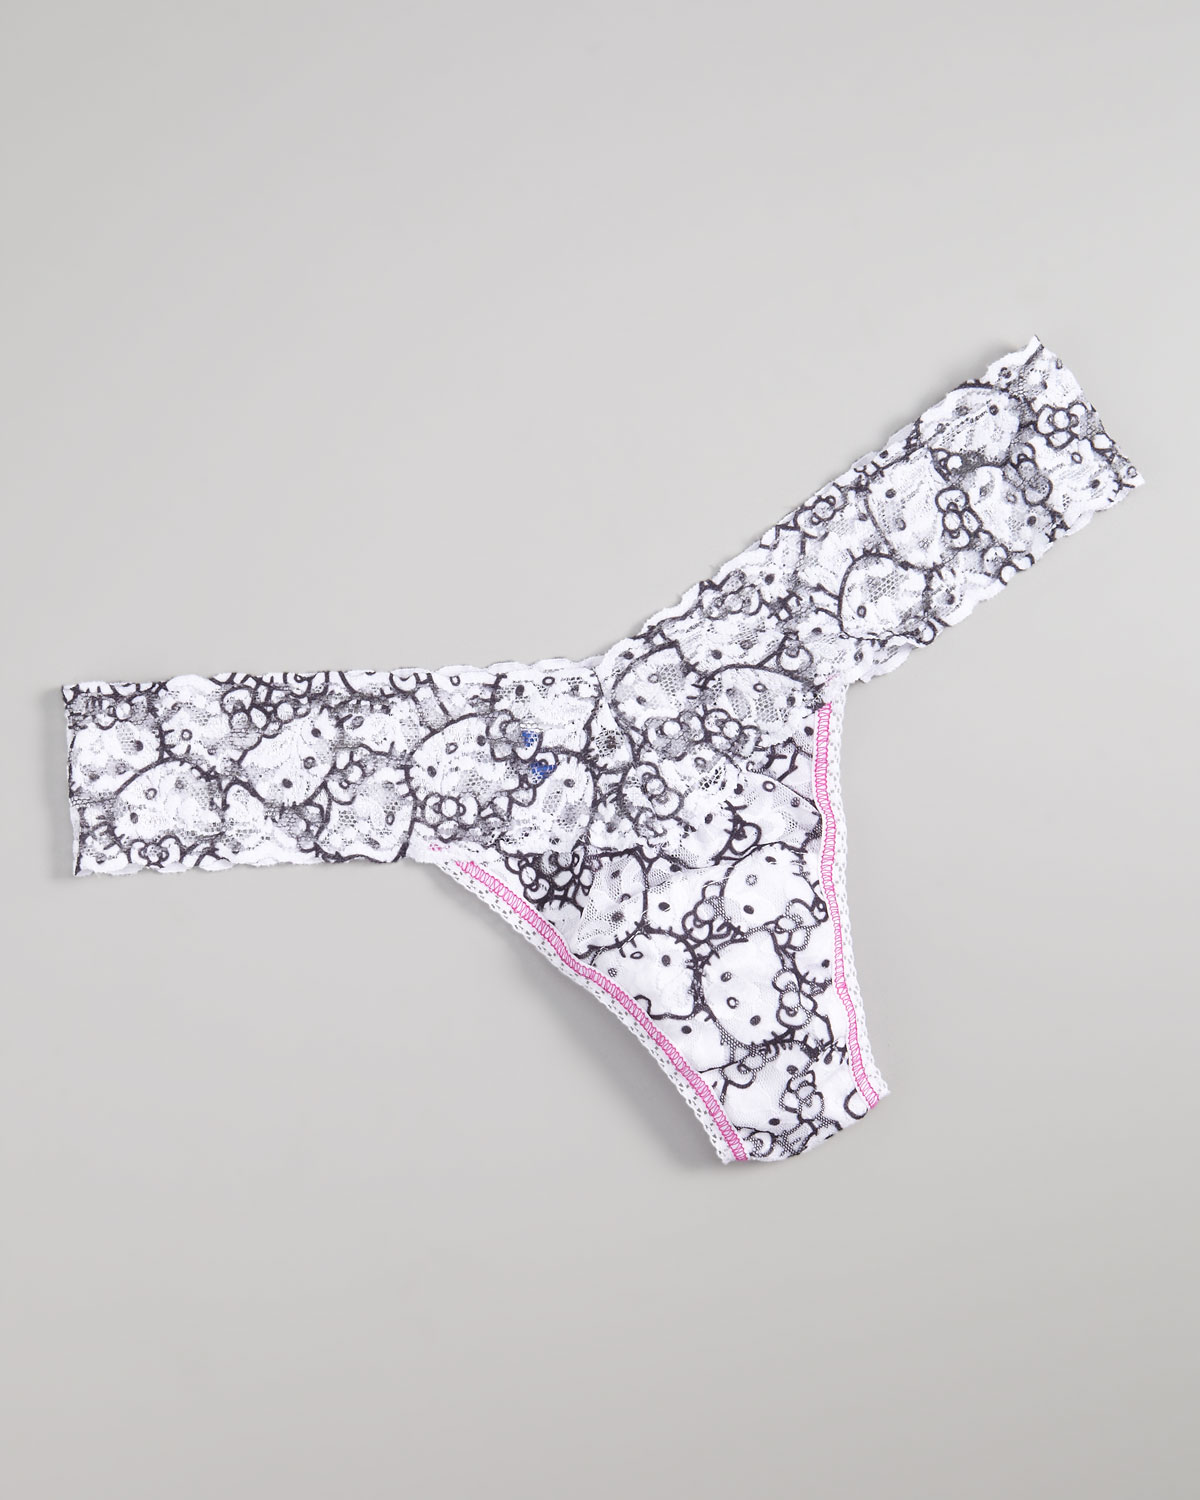 Thong of Thongs by Kitty Knish